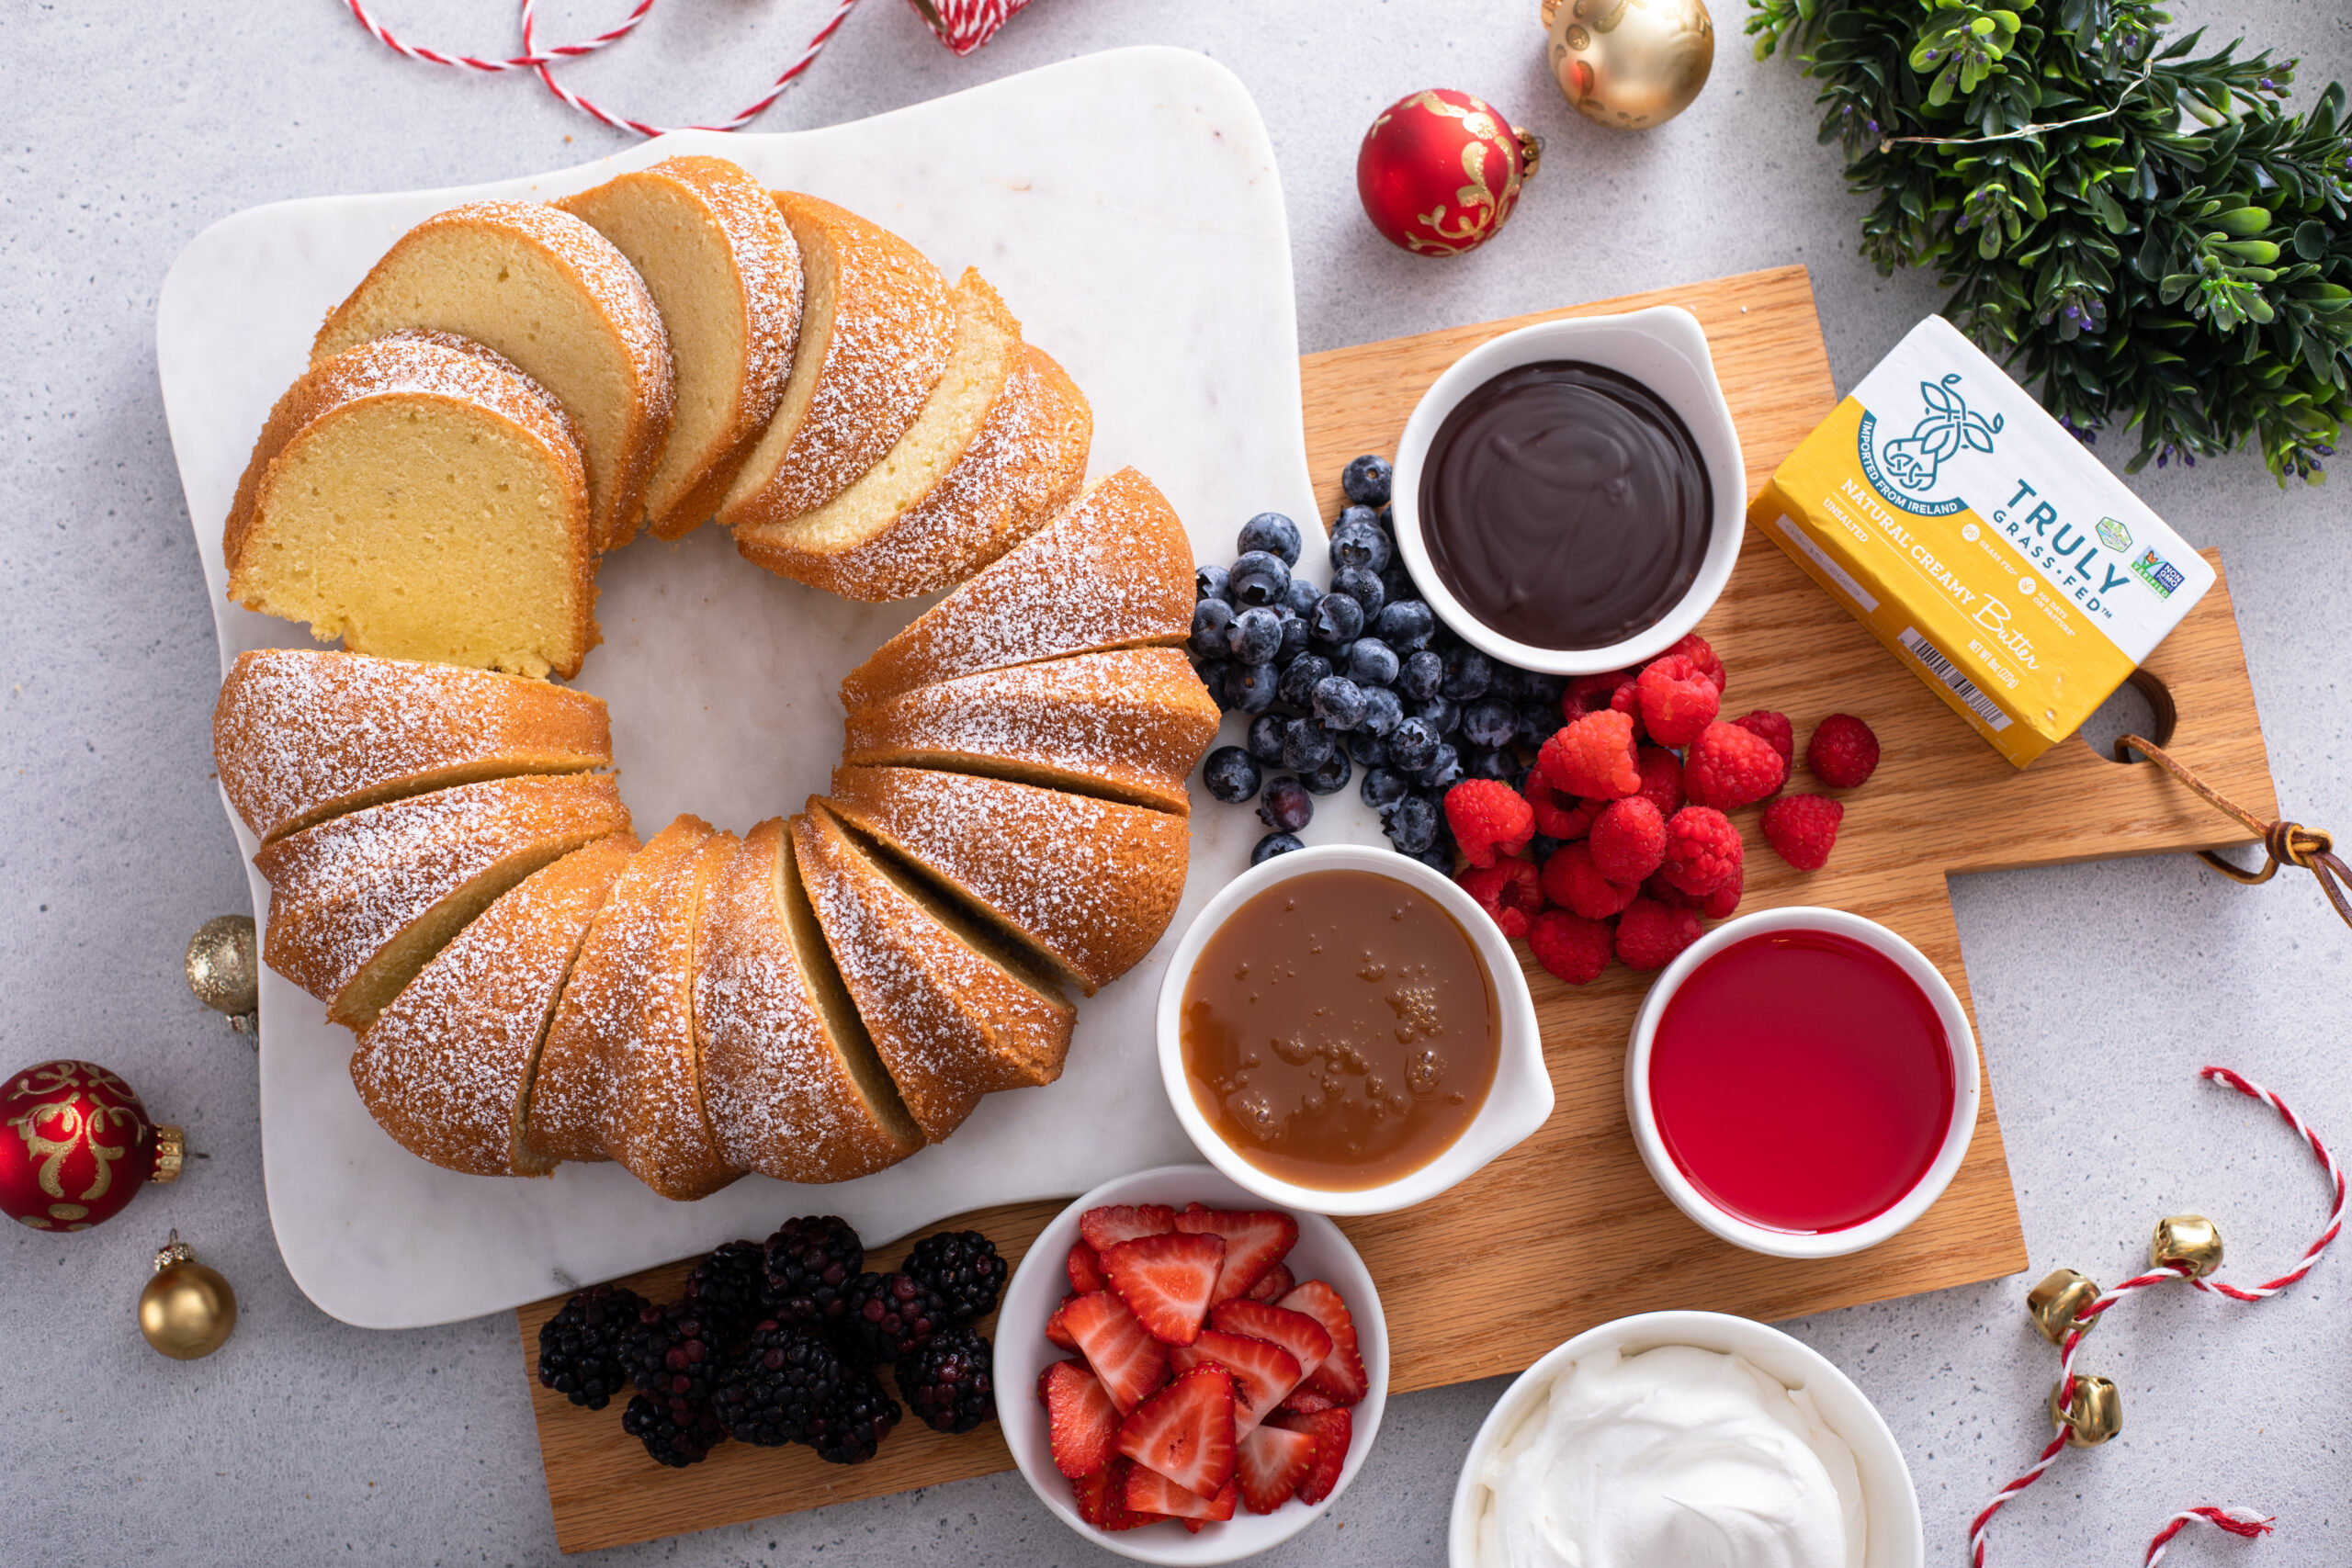 Looking for the perfect holiday gathering dessert? You need to try this Pound Cake bar this holiday season! Click HERE to make this delicious dessert and dessert bar!